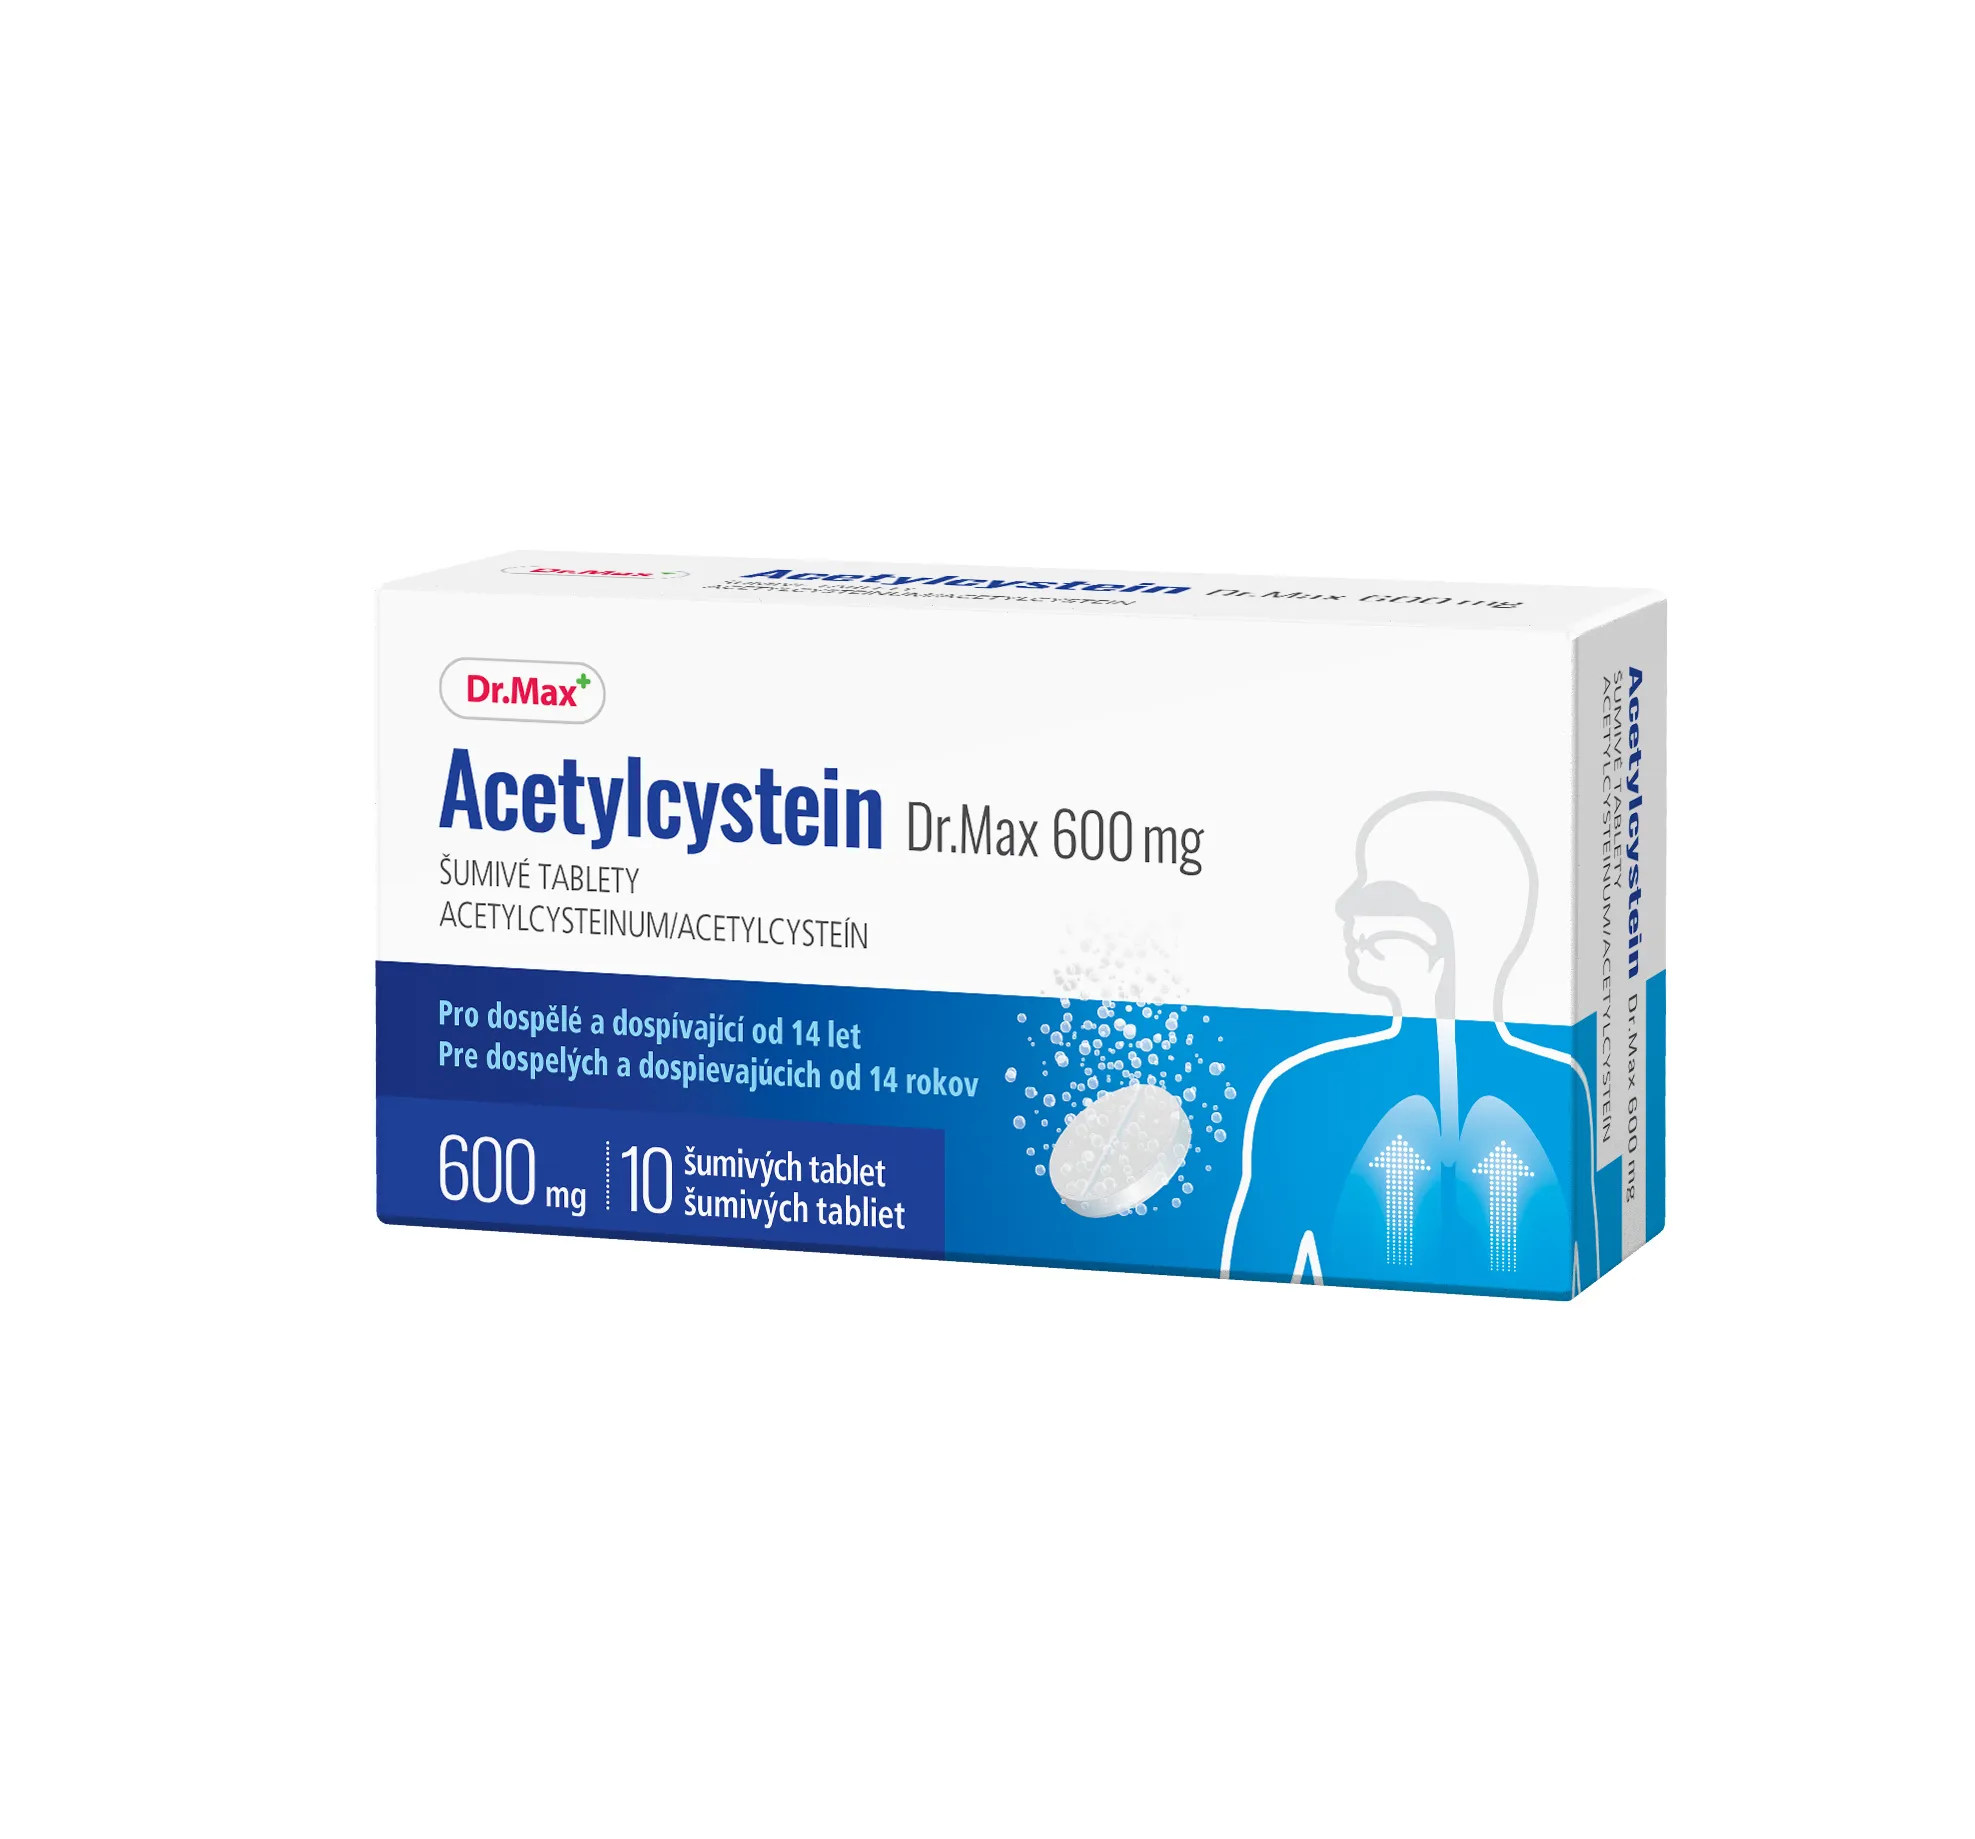 Dr. Max Acetylcystein 600 mg 10 šumivých tablet